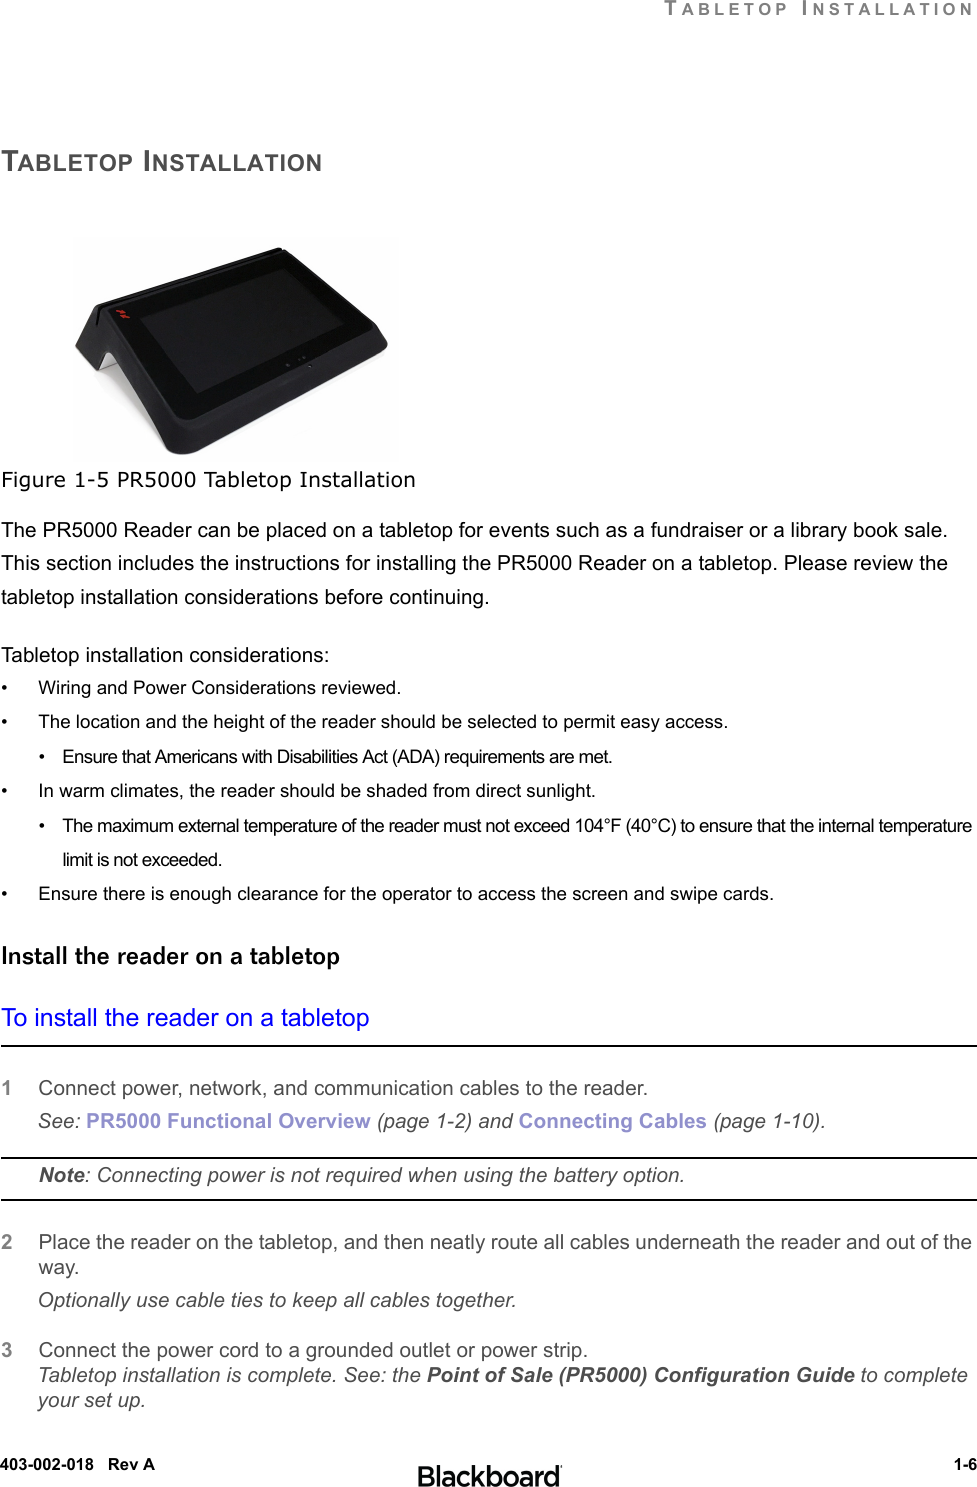 TABLETOP INSTALLATION 1-6403-002-018   Rev ATABLETOP INSTALLATIONFigure 1-5 PR5000 Tabletop InstallationThe PR5000 Reader can be placed on a tabletop for events such as a fundraiser or a library book sale. This section includes the instructions for installing the PR5000 Reader on a tabletop. Please review the tabletop installation considerations before continuing.Tabletop installation considerations:• Wiring and Power Considerations reviewed.• The location and the height of the reader should be selected to permit easy access.•    Ensure that Americans with Disabilities Act (ADA) requirements are met.• In warm climates, the reader should be shaded from direct sunlight.•    The maximum external temperature of the reader must not exceed 104°F (40°C) to ensure that the internal temperature limit is not exceeded.• Ensure there is enough clearance for the operator to access the screen and swipe cards.Install the reader on a tabletopTo install the reader on a tabletop1Connect power, network, and communication cables to the reader.See: PR5000 Functional Overview (page 1-2) and Connecting Cables (page 1-10).Note: Connecting power is not required when using the battery option.2Place the reader on the tabletop, and then neatly route all cables underneath the reader and out of the way. Optionally use cable ties to keep all cables together.3Connect the power cord to a grounded outlet or power strip.Tabletop installation is complete. See: the Point of Sale (PR5000) Configuration Guide to complete your set up.